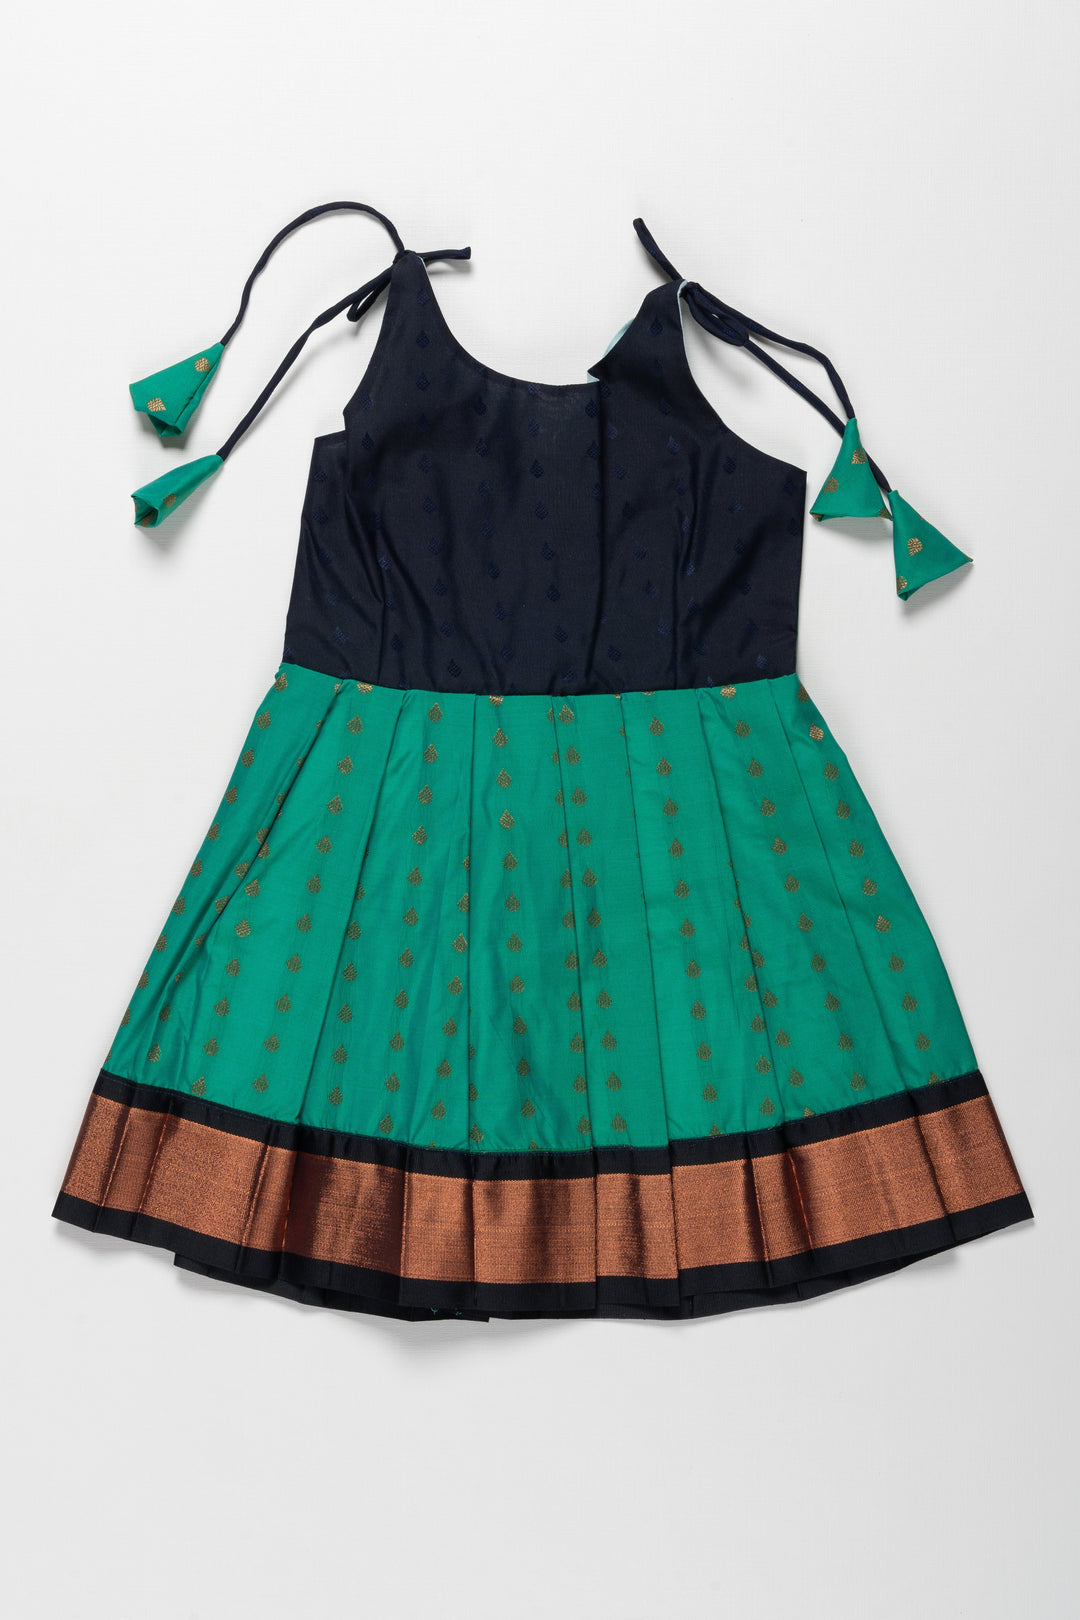 The Nesavu Tie-up Frock Enchanting Green and Bronze Silk Knot-Tie Frock for Ayush Homam and Noolukettu: A Blend of Tradition Nesavu 14 (6M) / Green / Style 4 T378D-14 Chic Green and Bronze Silk Dresses for Girls | Elegant Party Wear with KnotTie Detail | The Nesavu